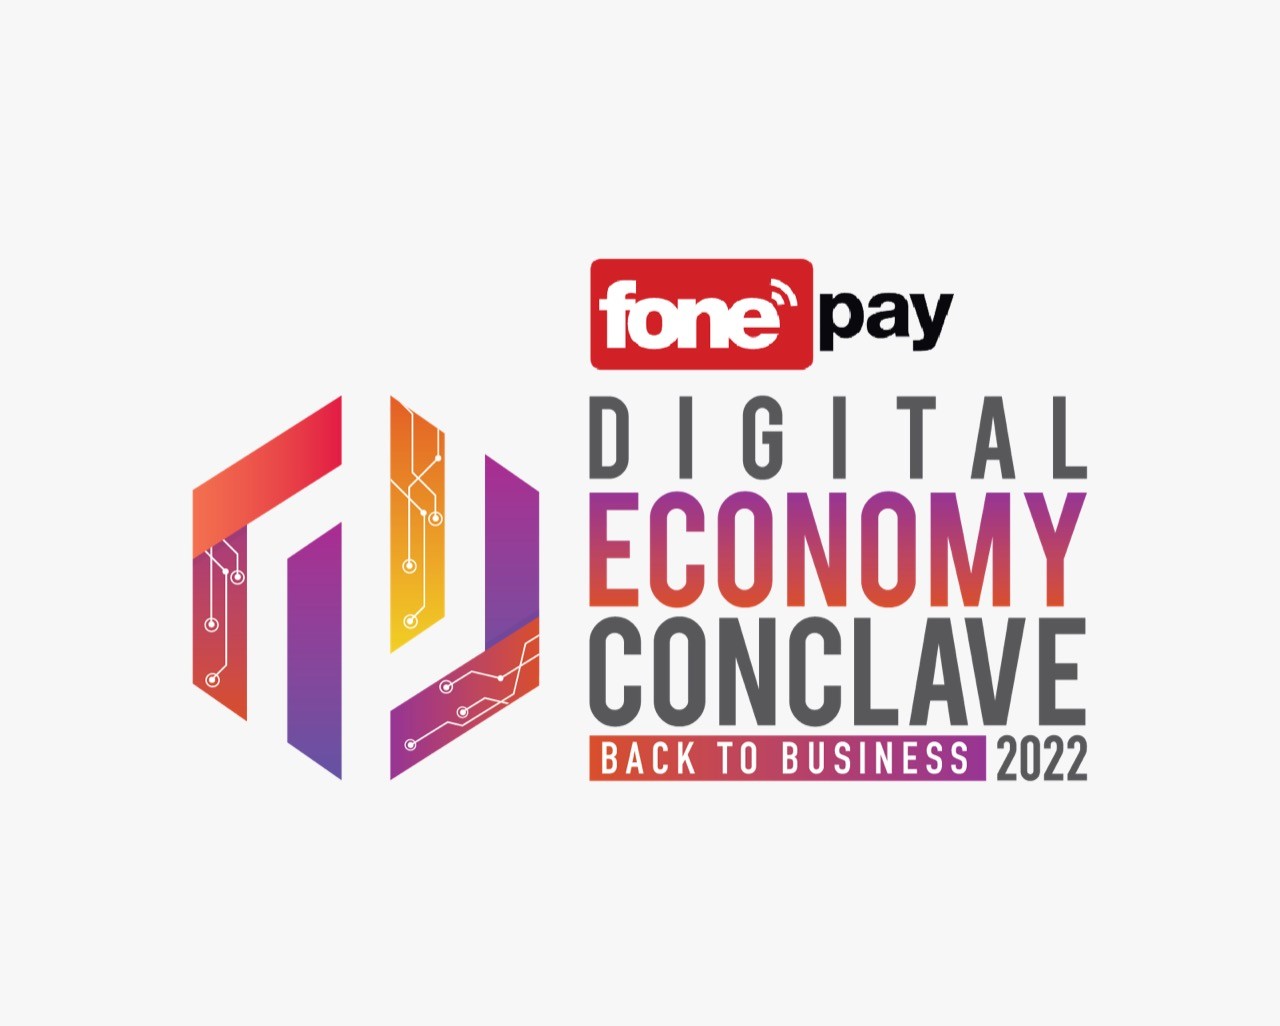 Fonepay Digital Economy Conclave 2022 Concludes Successfully